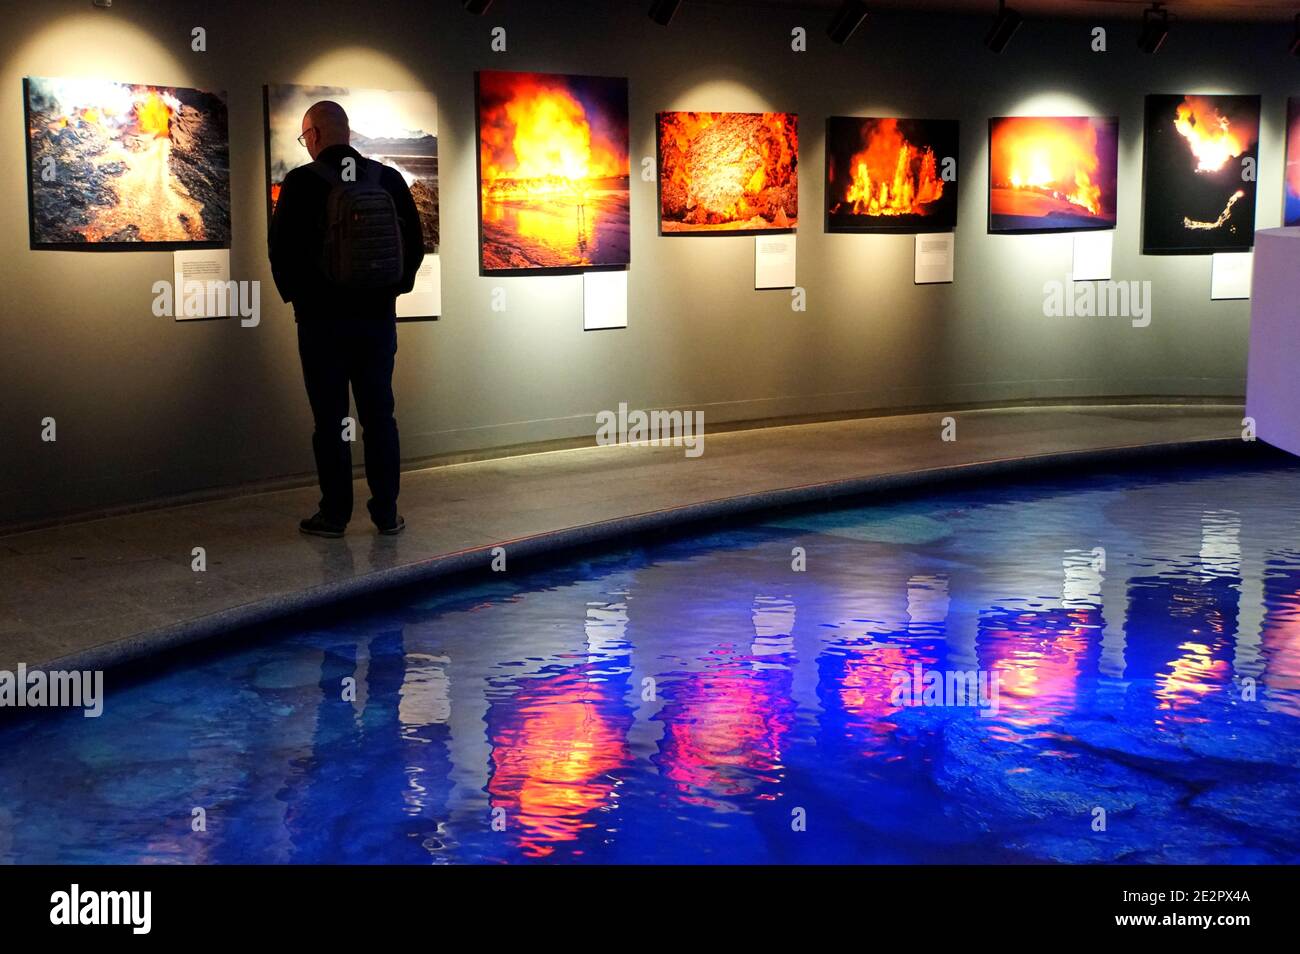 Reykjavik, Iceland - June 21, 2019 - The photo collection of volcanic eruption inside Perlan, the famous planetarium and exhibition center Stock Photo